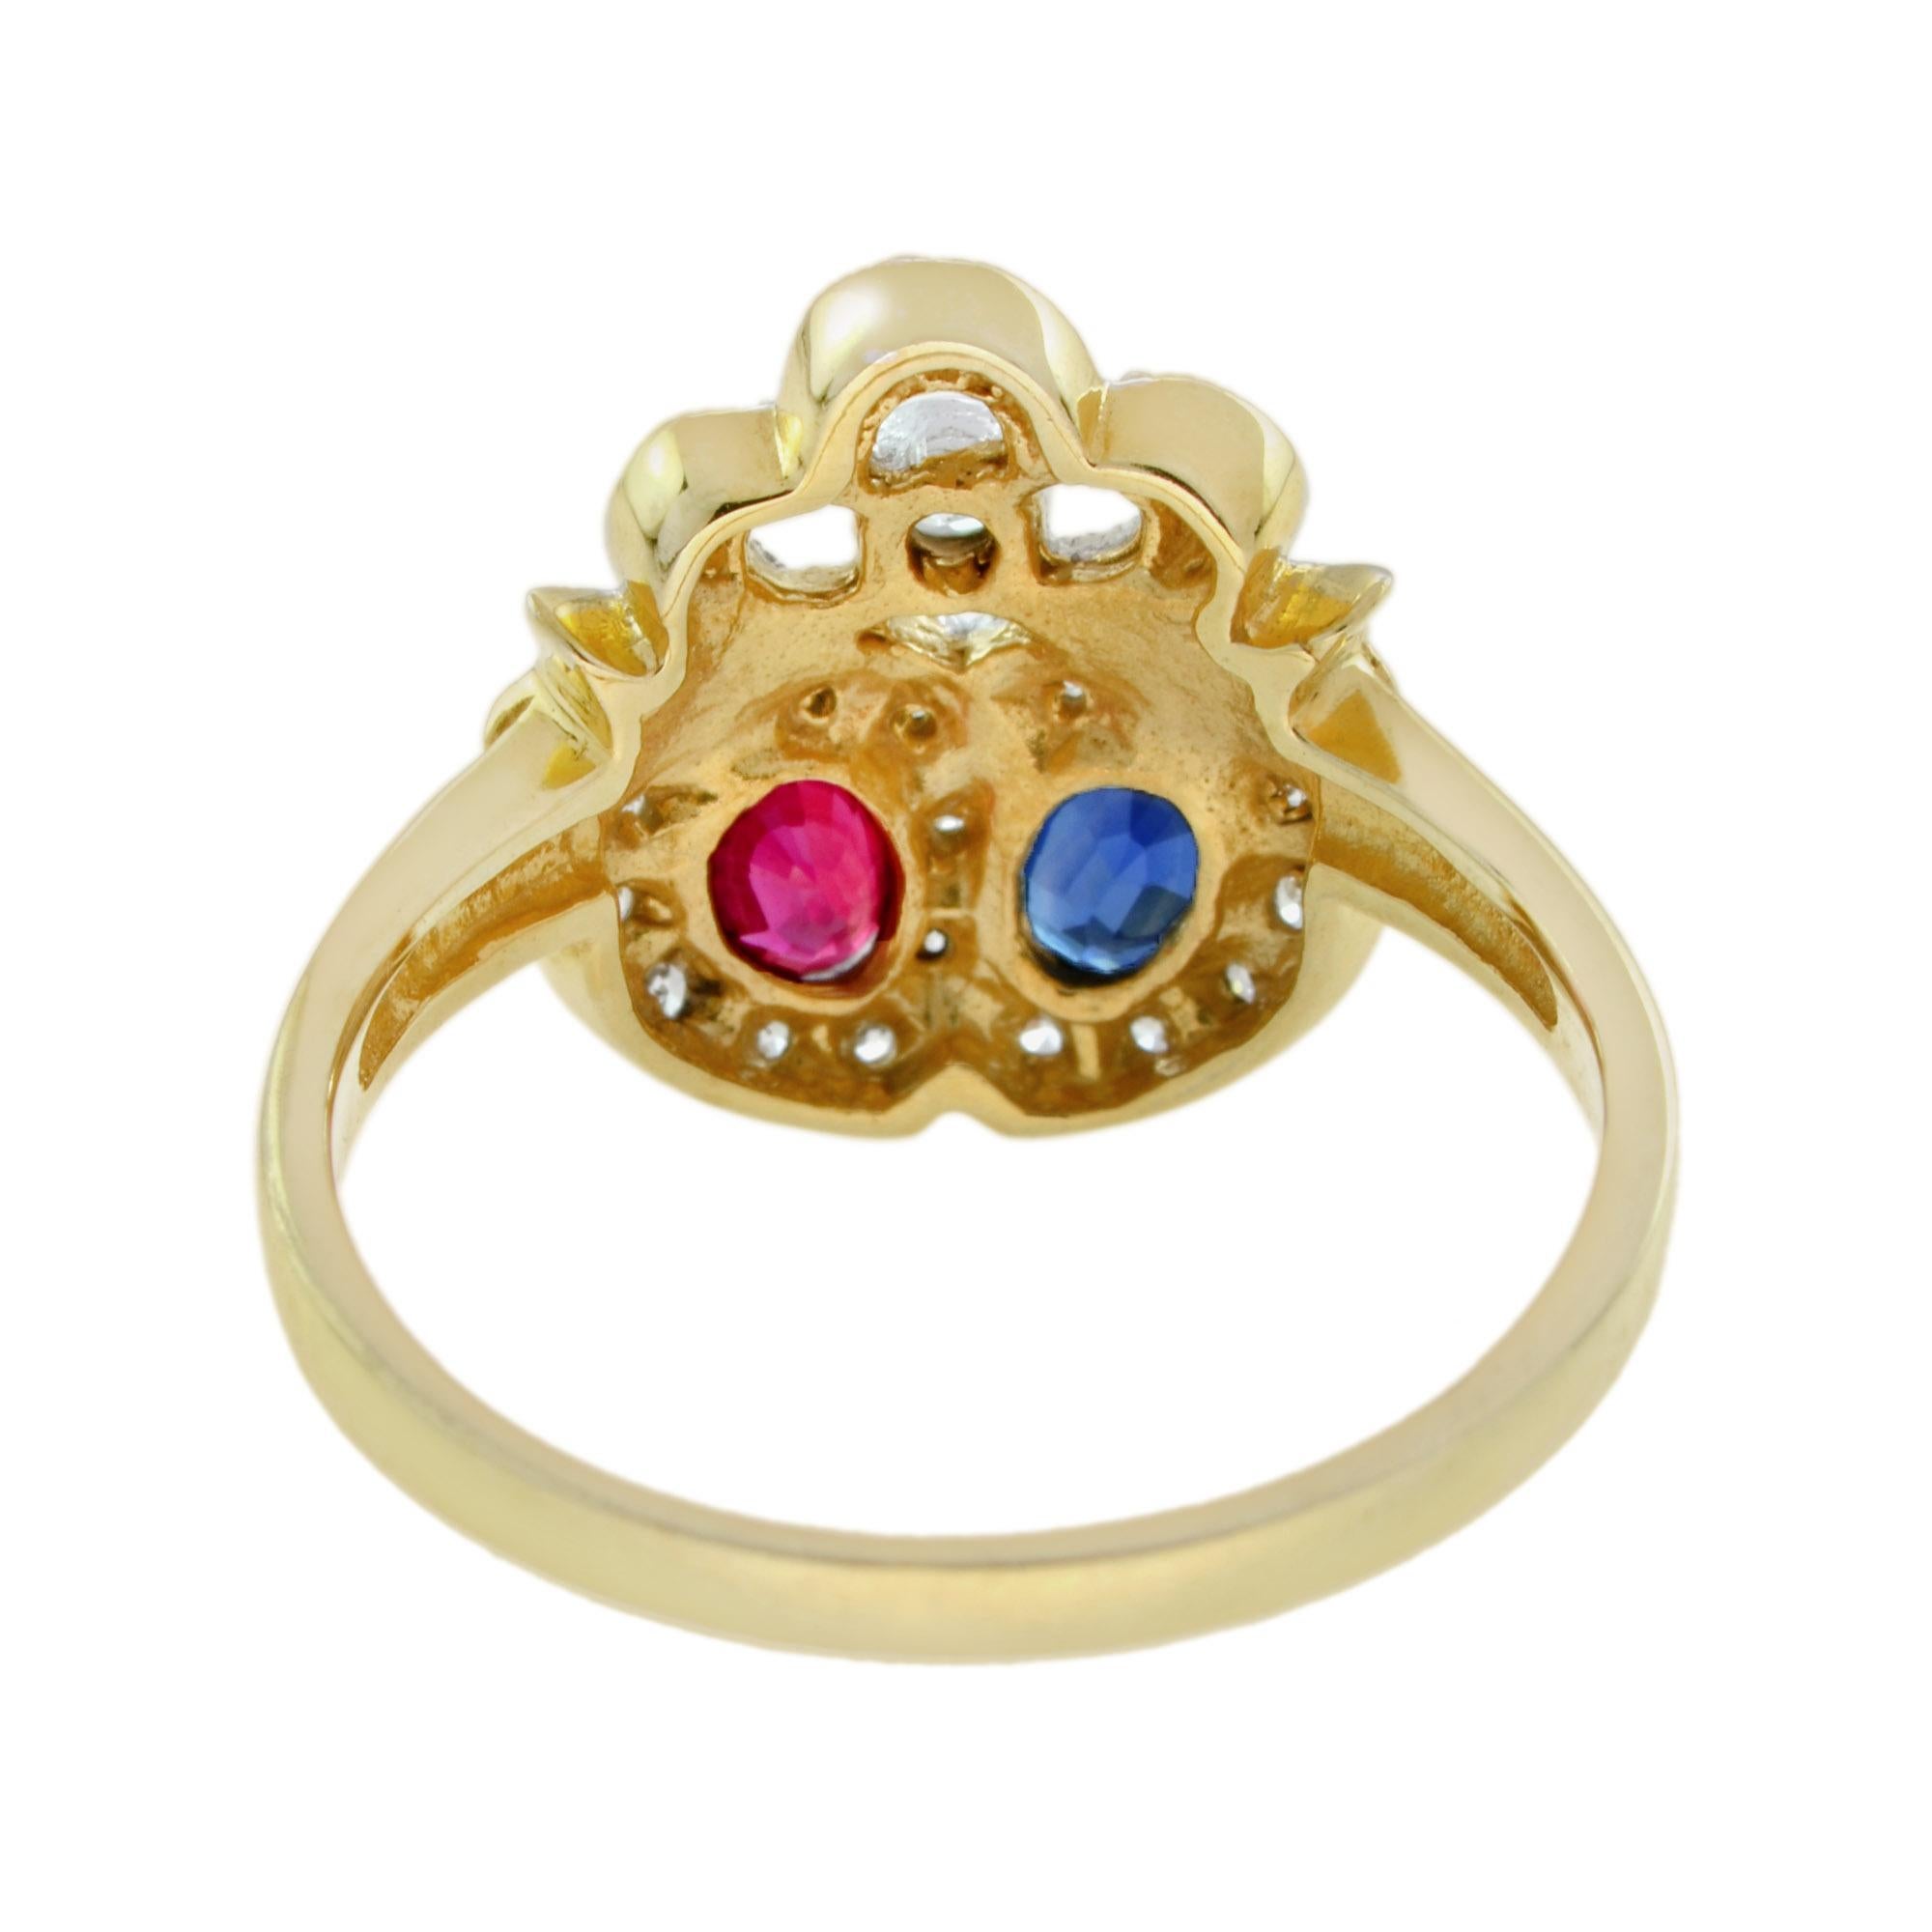 For Sale:  Blue Sapphire Ruby Diamond Double Heart Vintage Style Ring in 14K Yellow Gold 5